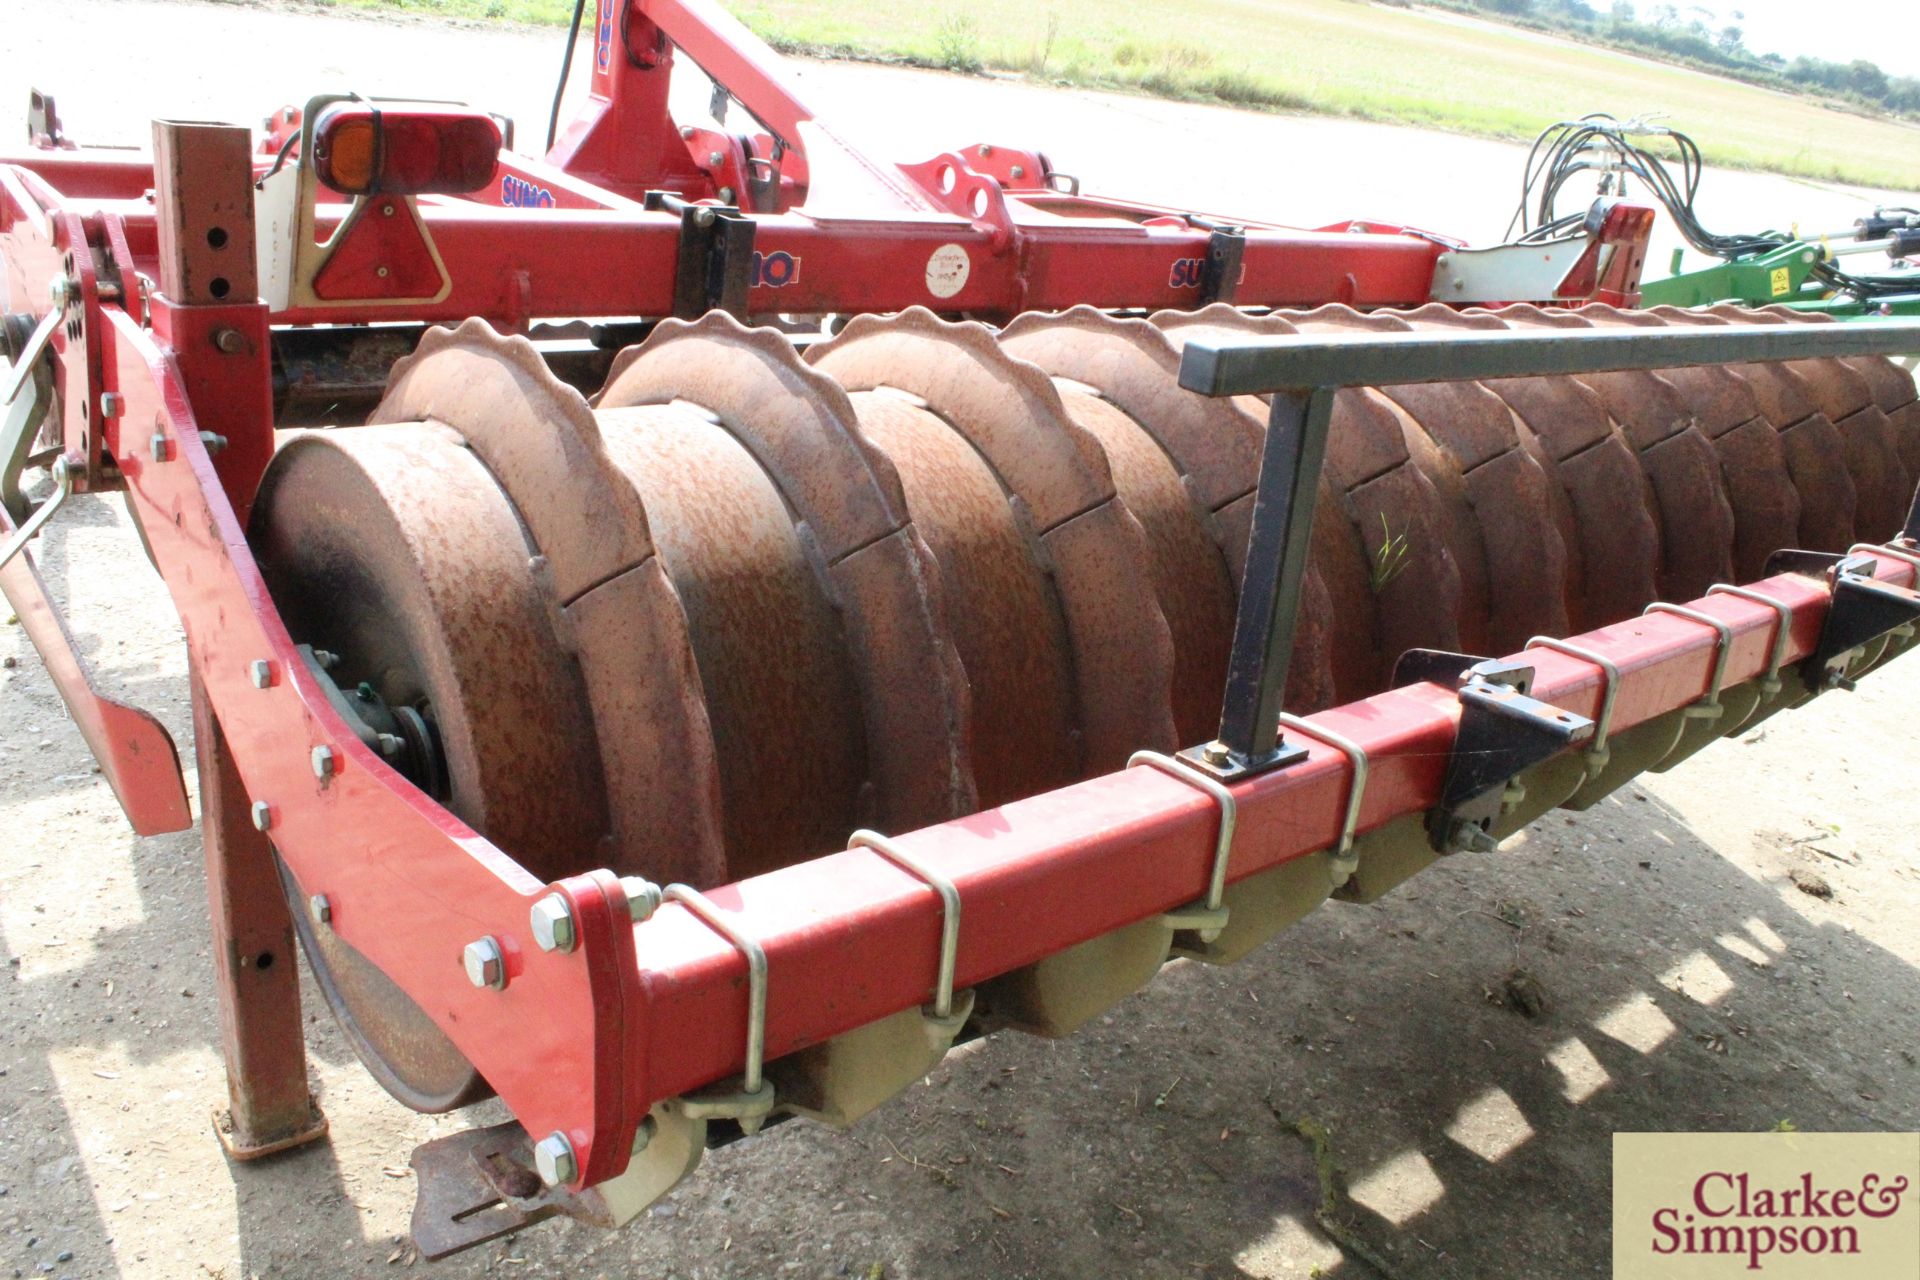 Sumo Trio 3 3m mounted cultivator 2012. Serial number 11626. With six Metcalfe low disturbance legs, - Image 13 of 21